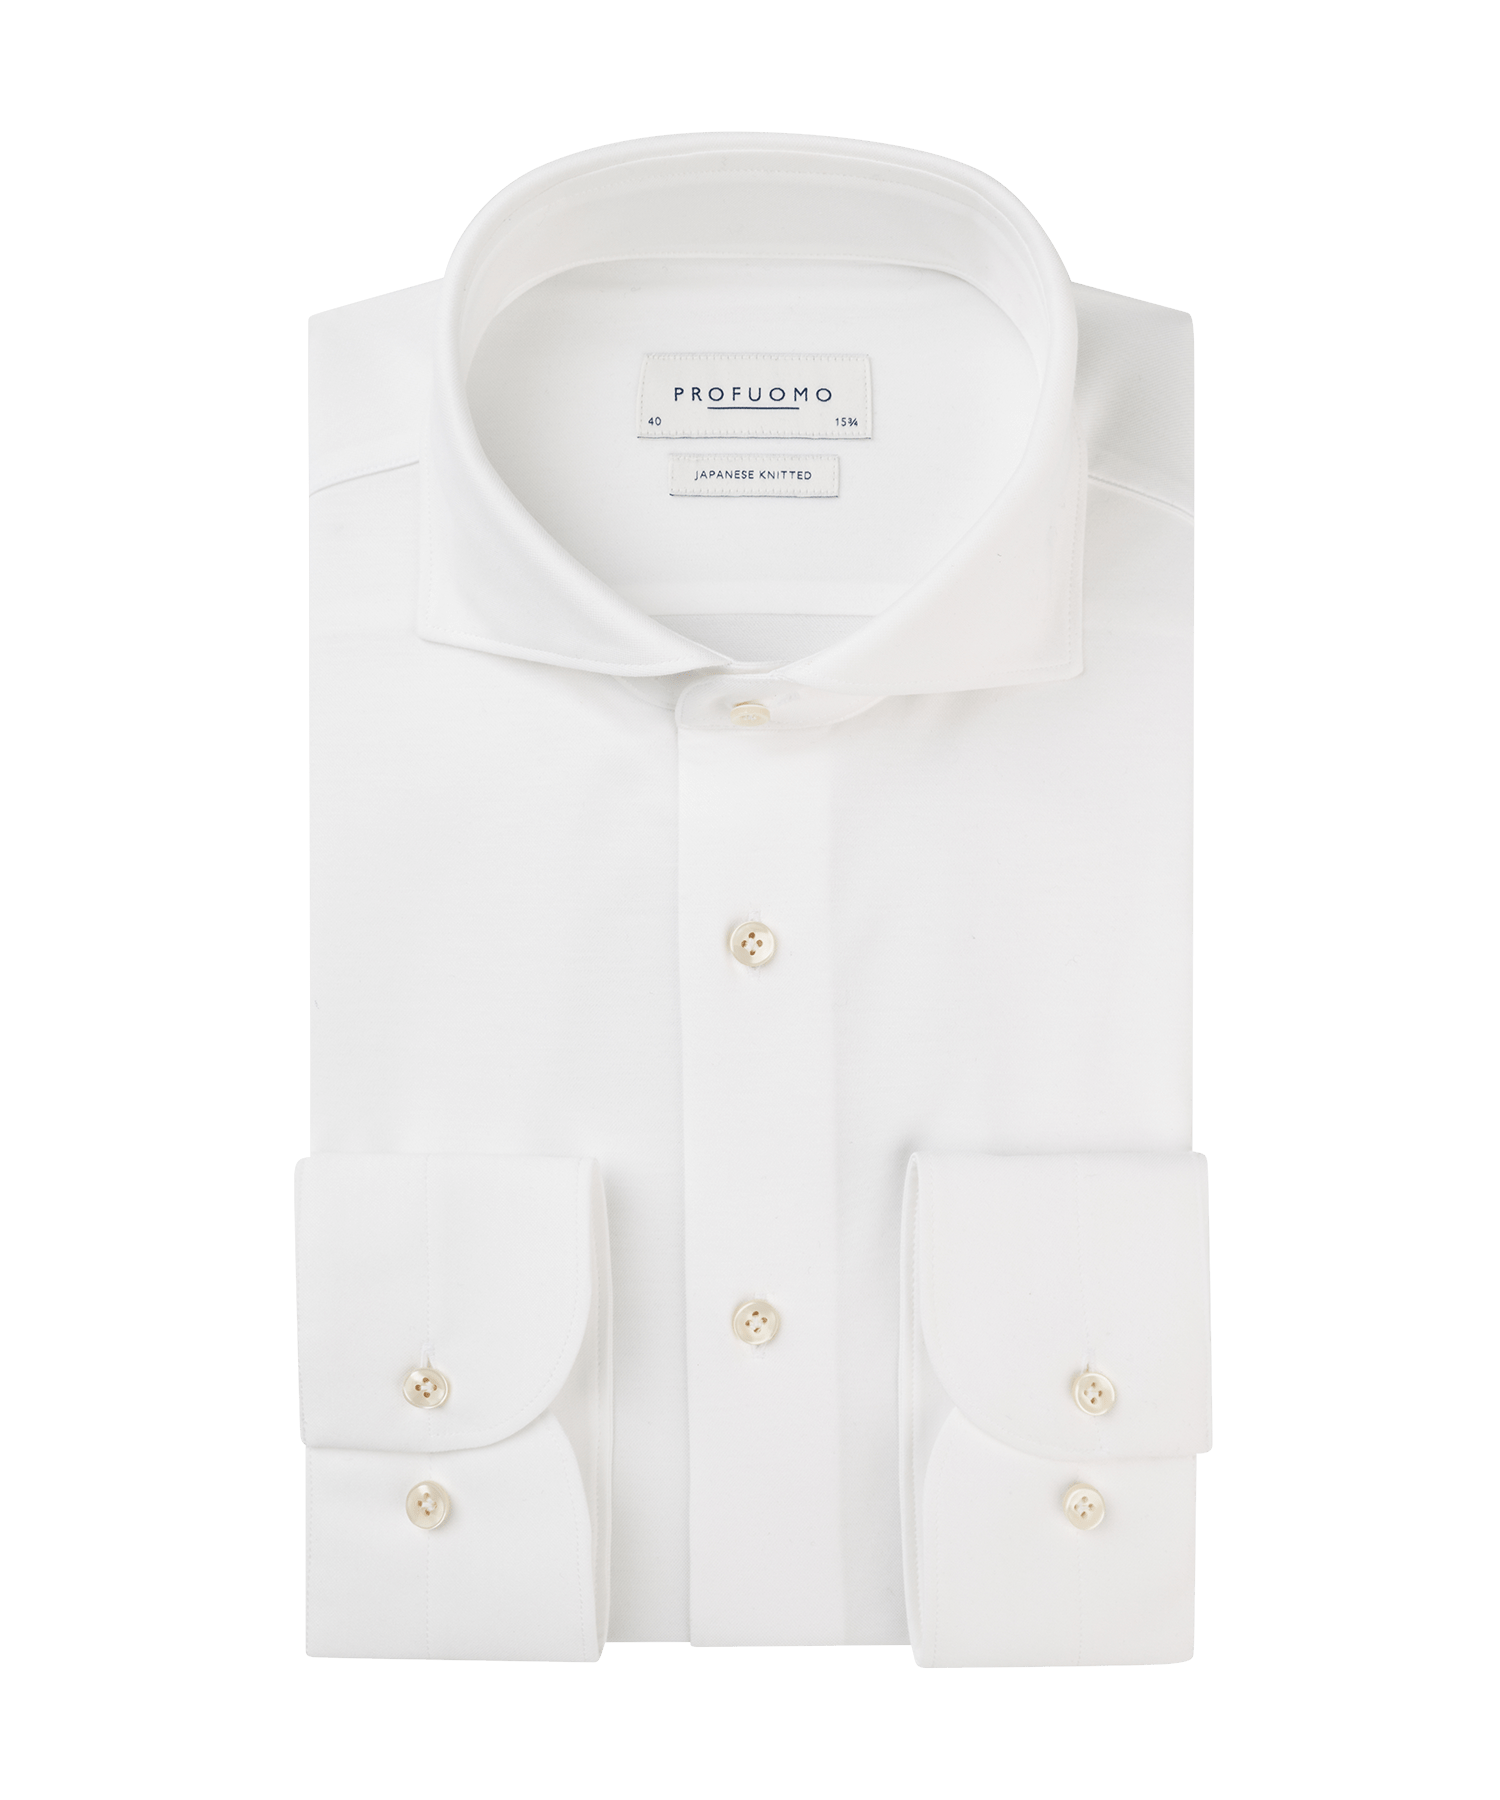 Profuomo Japanese knitted shirts